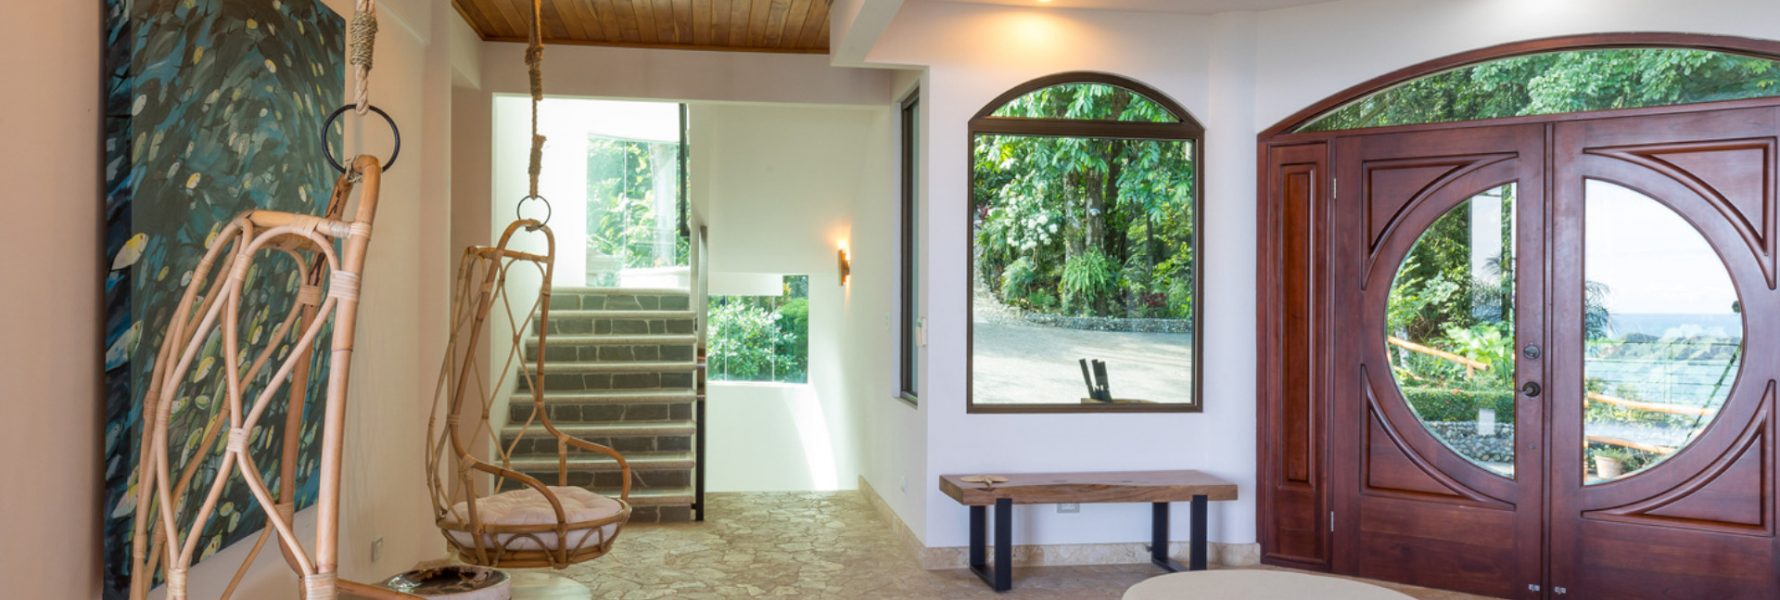 The beautiful entrance to the villa has a natural stone floor and some unique and comfy seats for lounging.